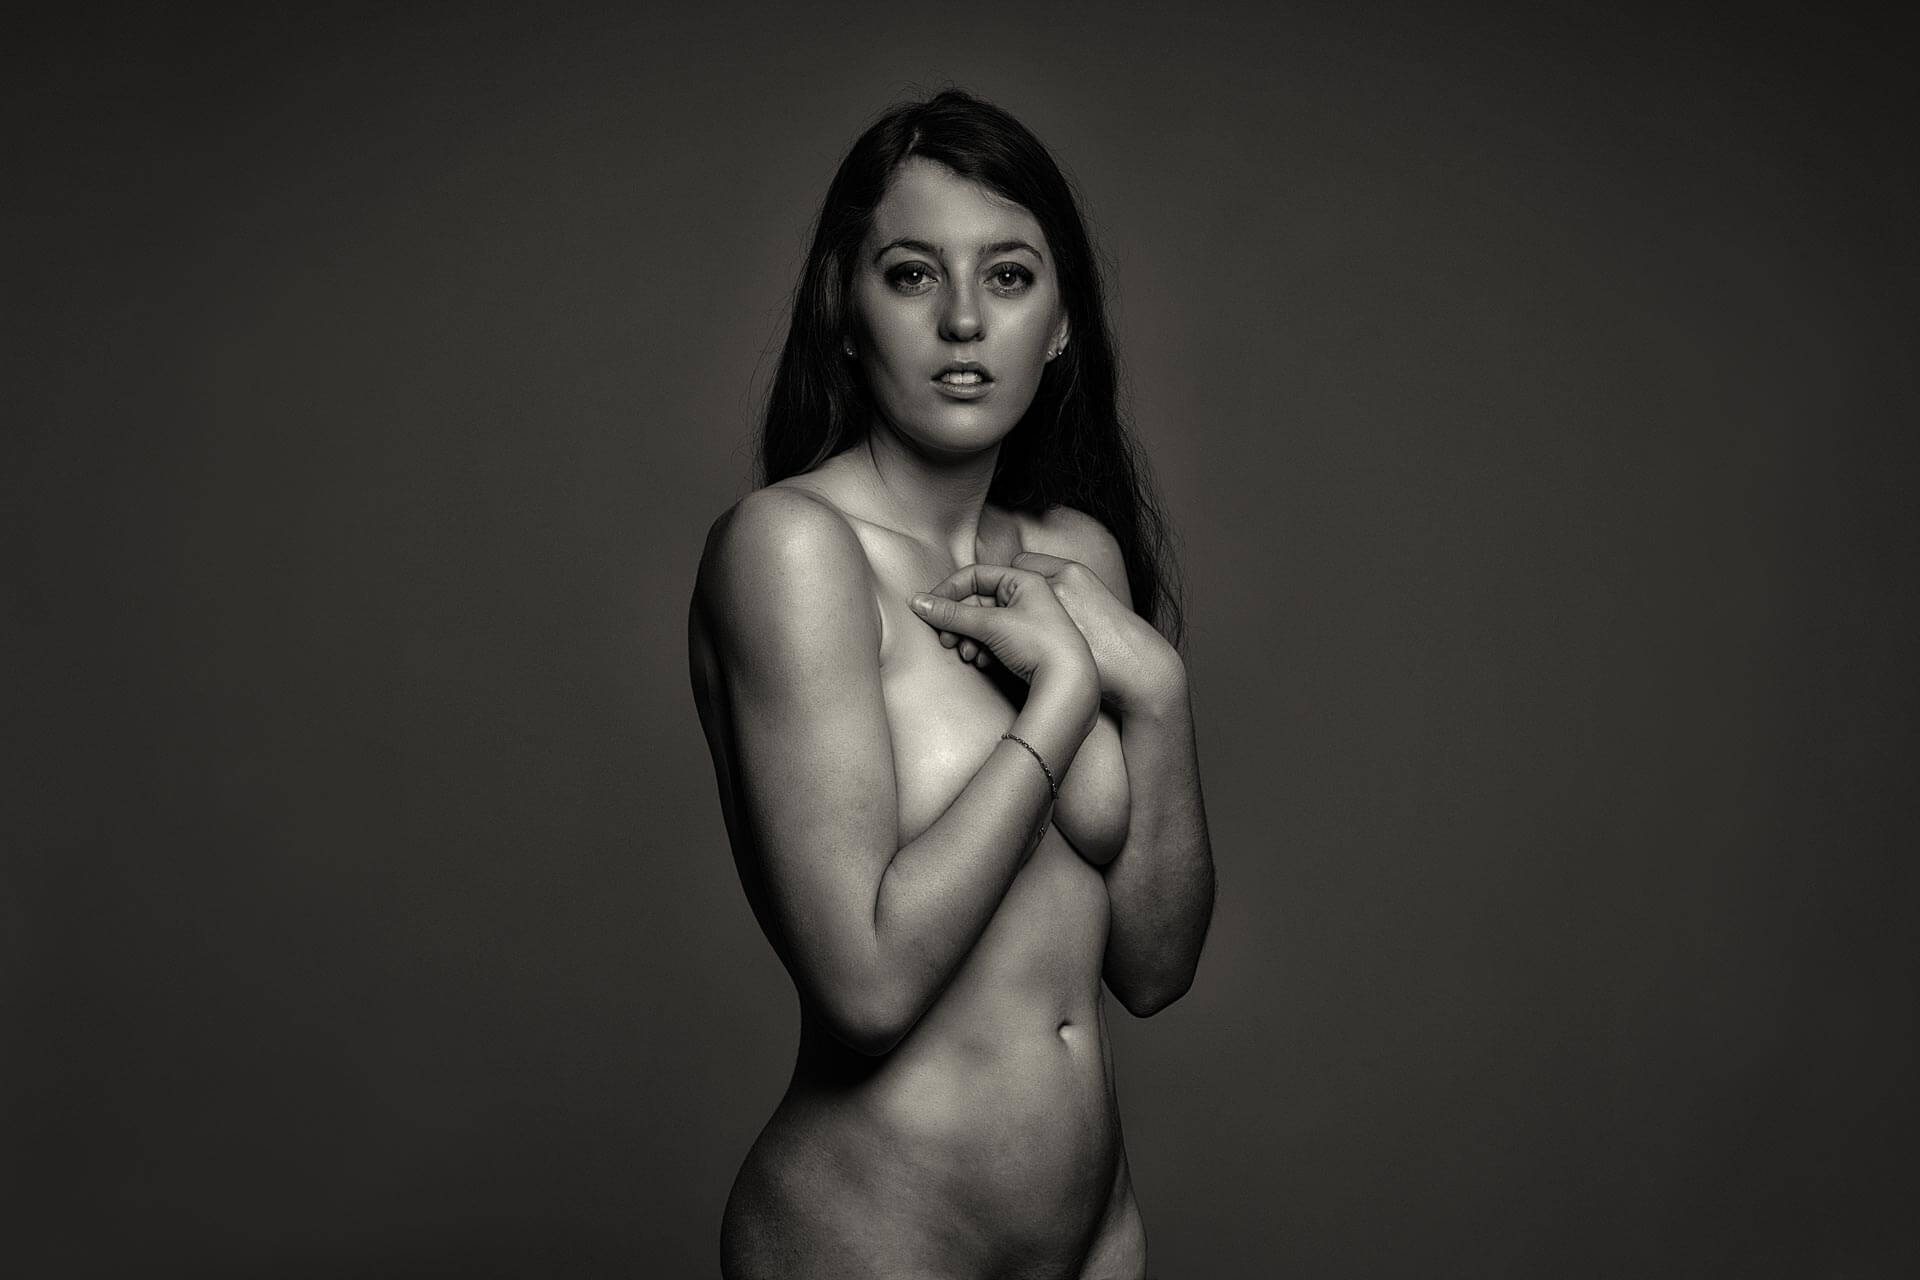 Nude Photography Auckland